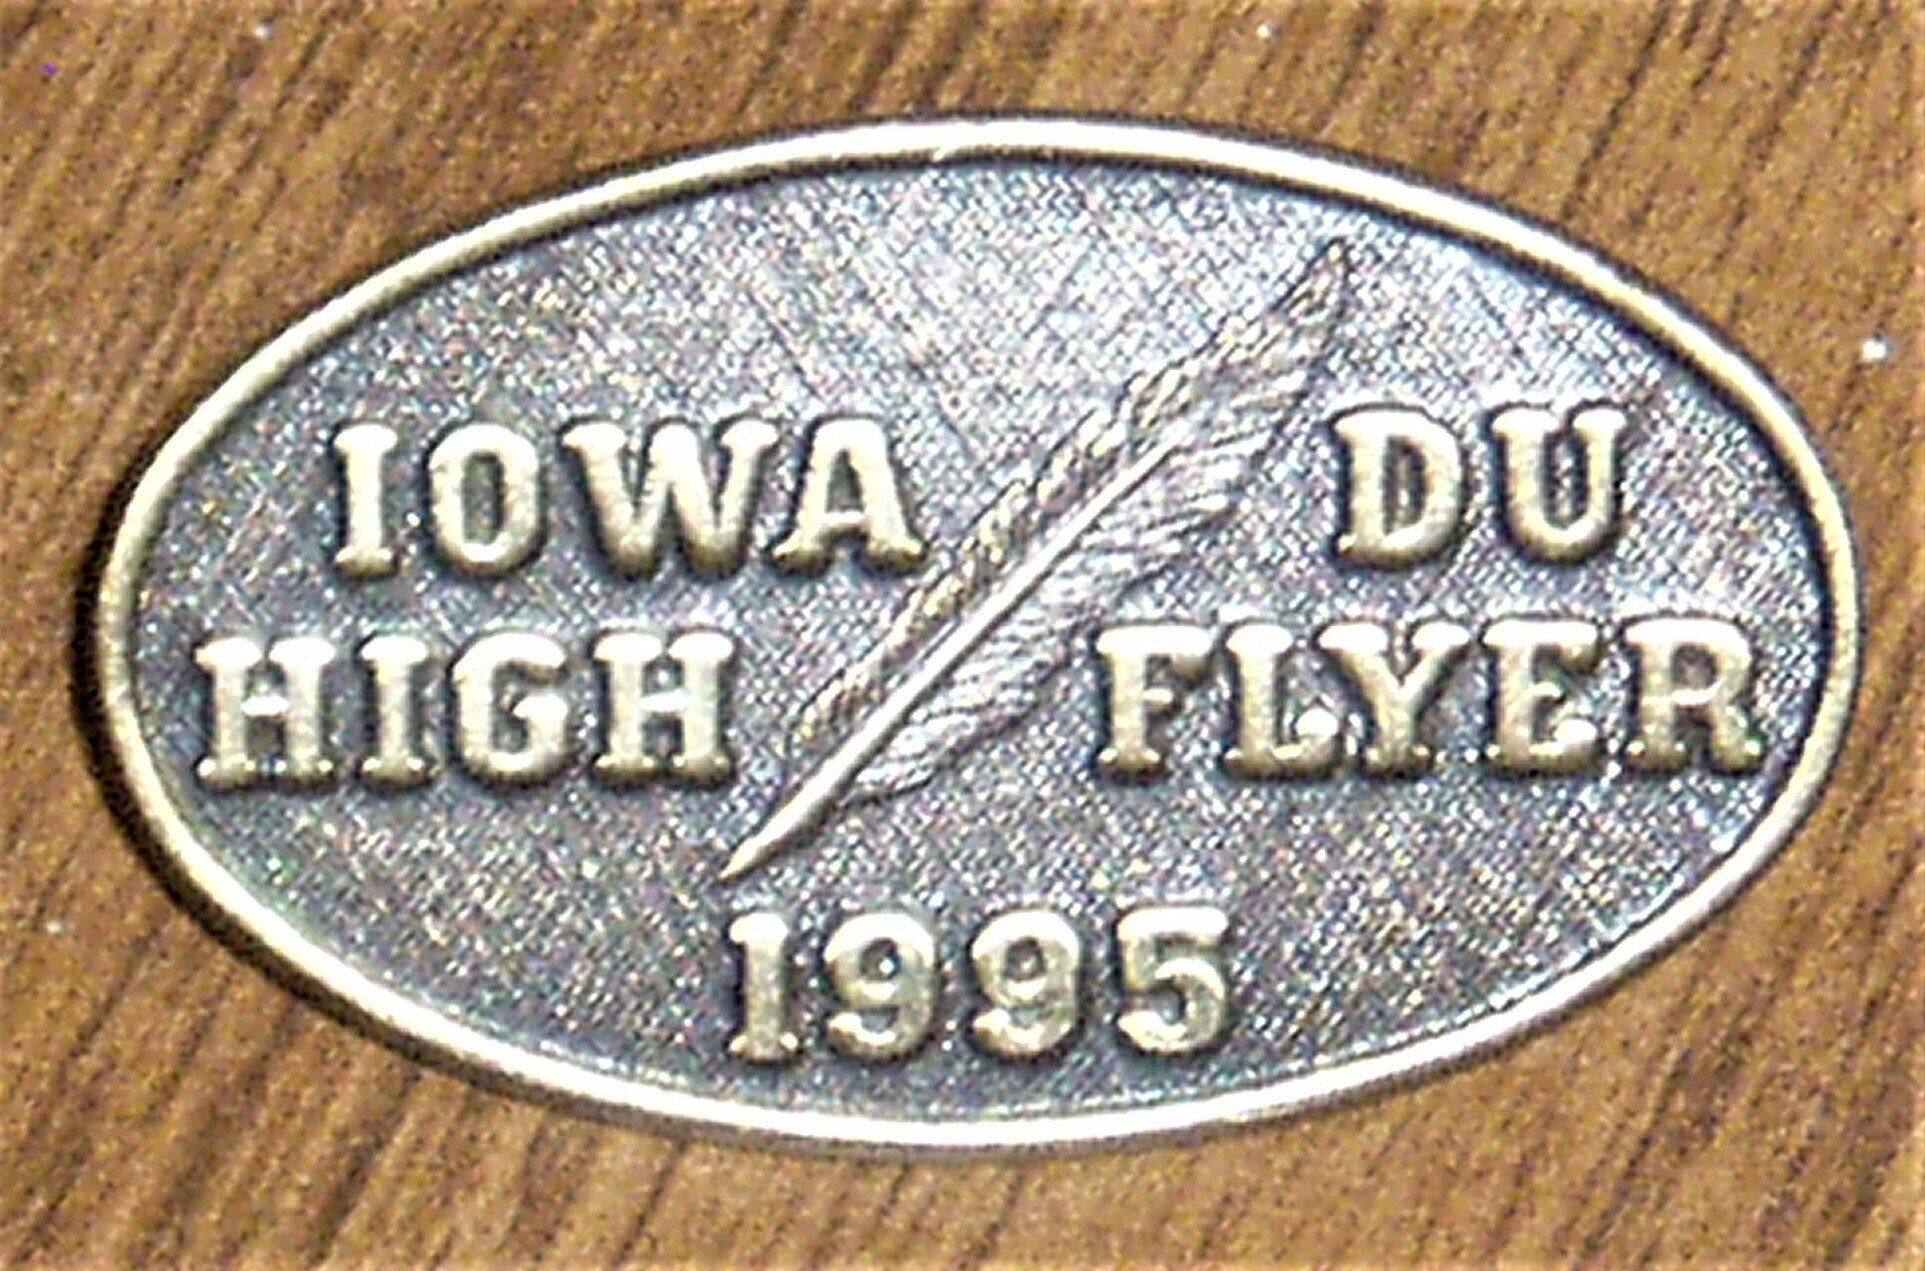 Vintage 1999 Iowa Ducks Unlimited Pin Sealed NOS New Old Stock HIGH FLYER 